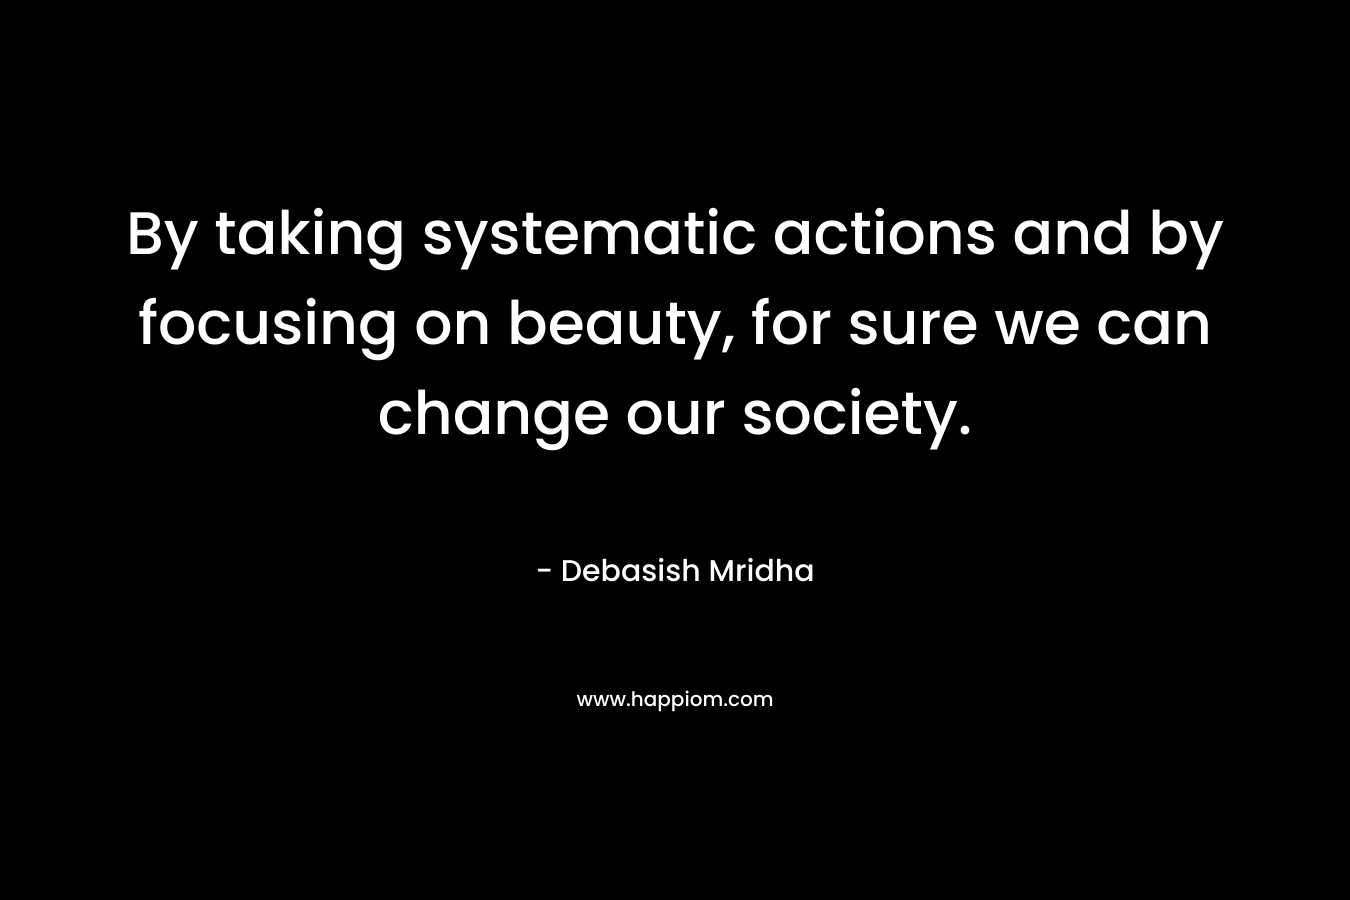 By taking systematic actions and by focusing on beauty, for sure we can change our society.